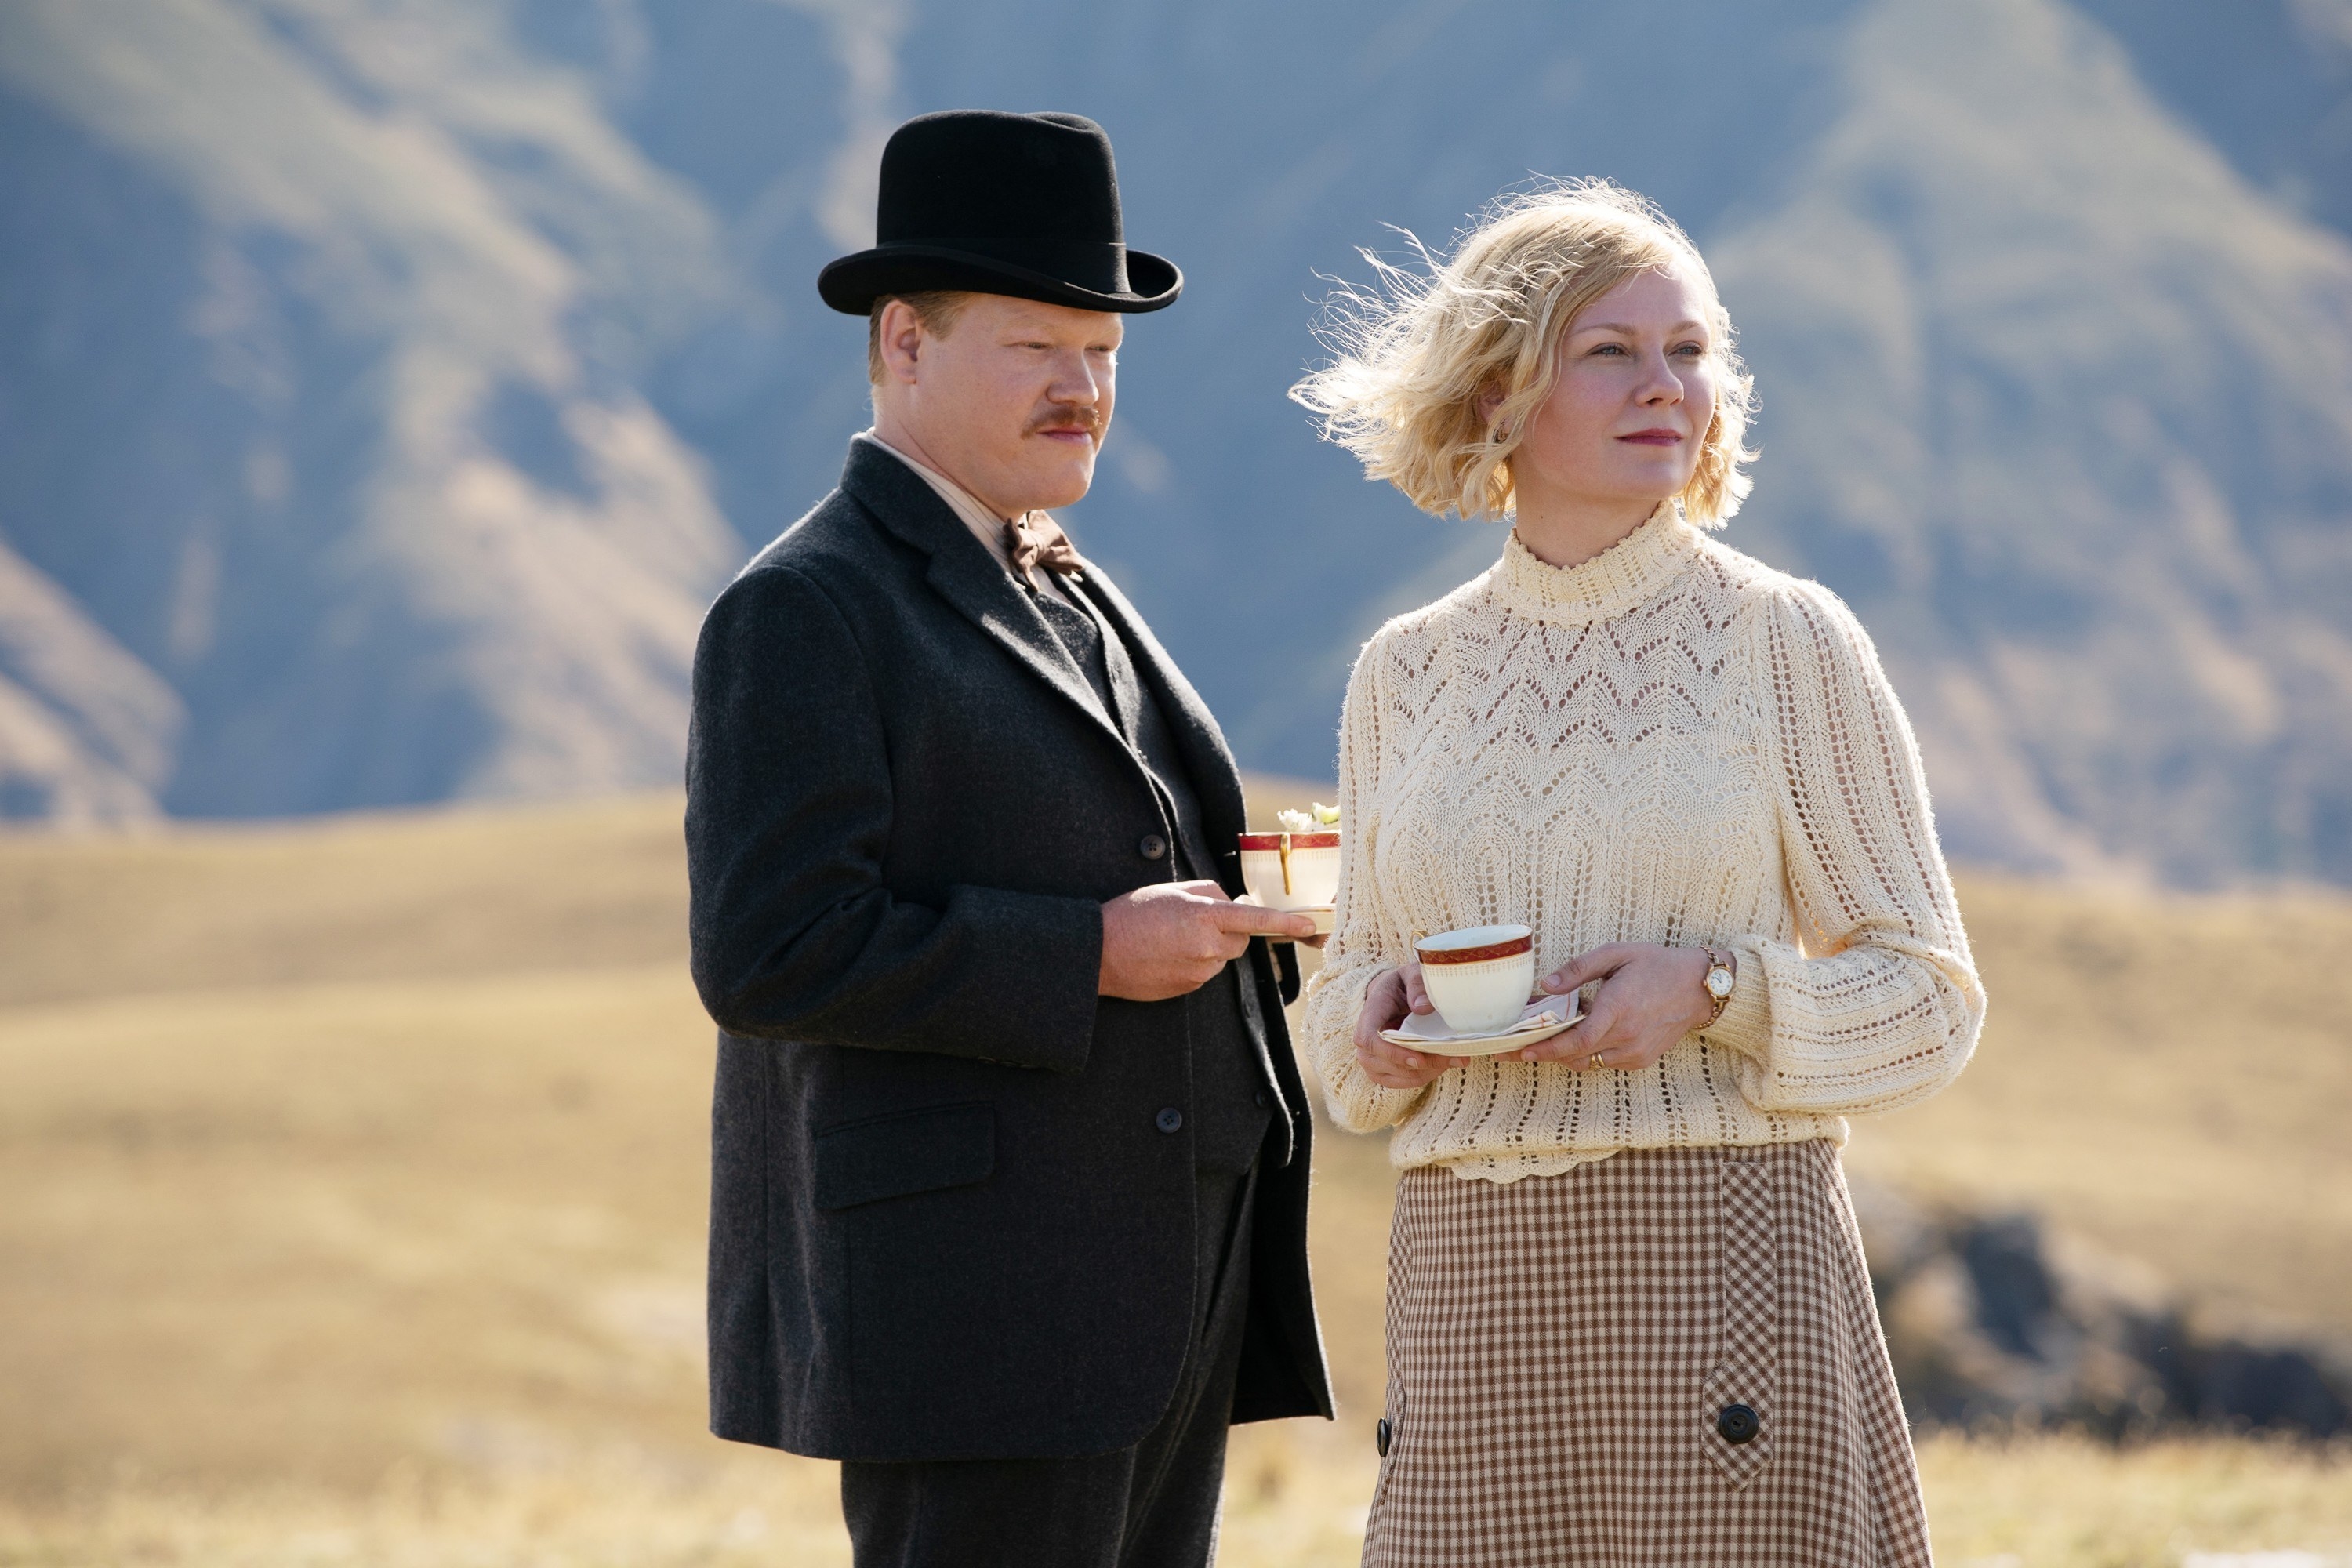 Jesse Plemons and Kirsten Dunst stand with coffee cups